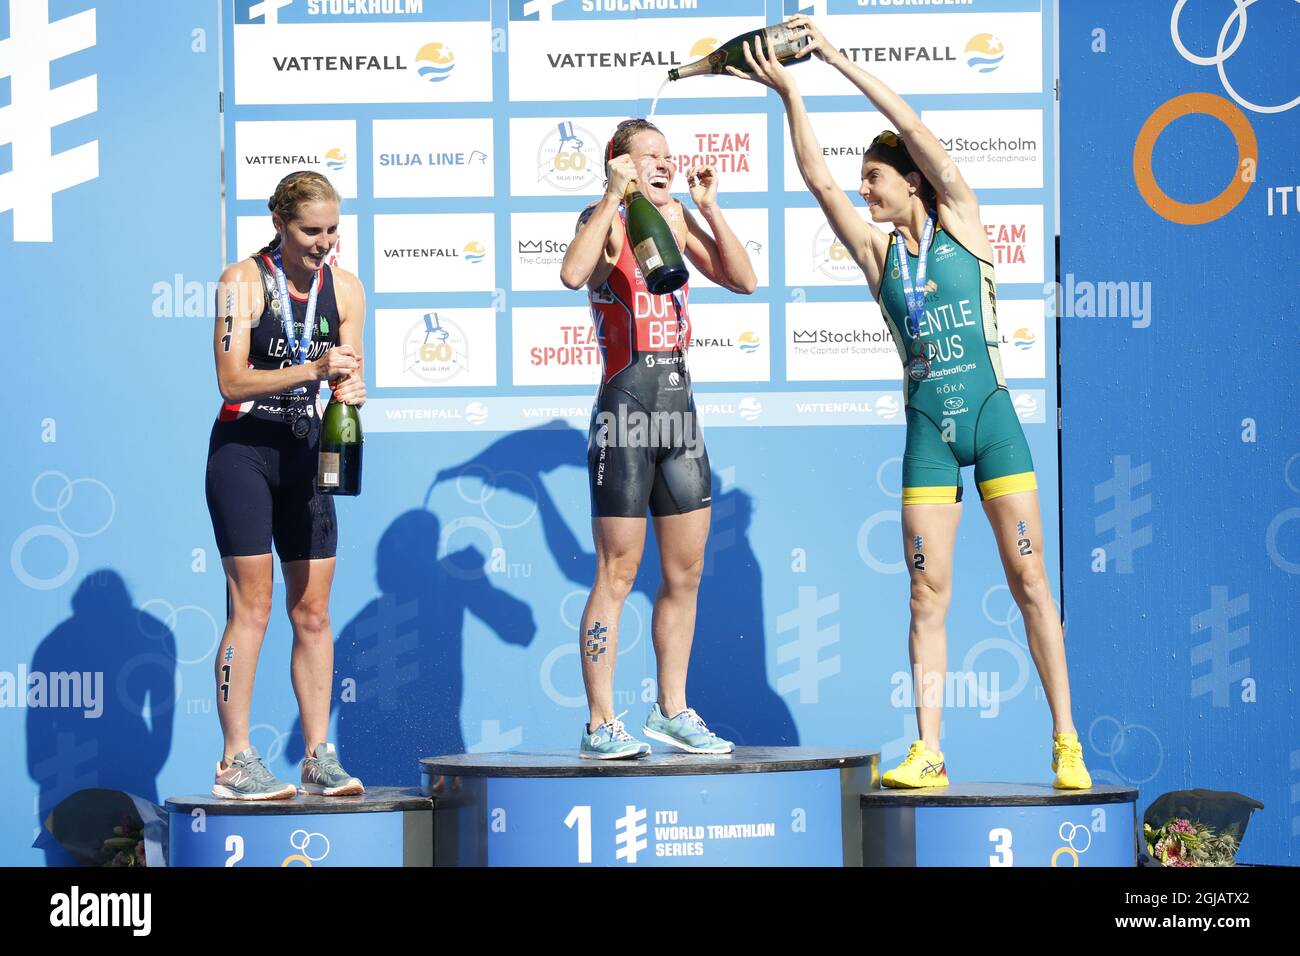 STOCKHOLM 2017-08-26 Jessica Learmonth, United Kingdom, Flora Duffy, Bermuda and Ashleigh Gentle, Australia with their medals and champagne after the women's triathlon competition in the ITU World Triathlon Series in central Stockholm, Sweden, August 26, 2017. Photo: Christine Olsson / TT / Code 10430  Stock Photo